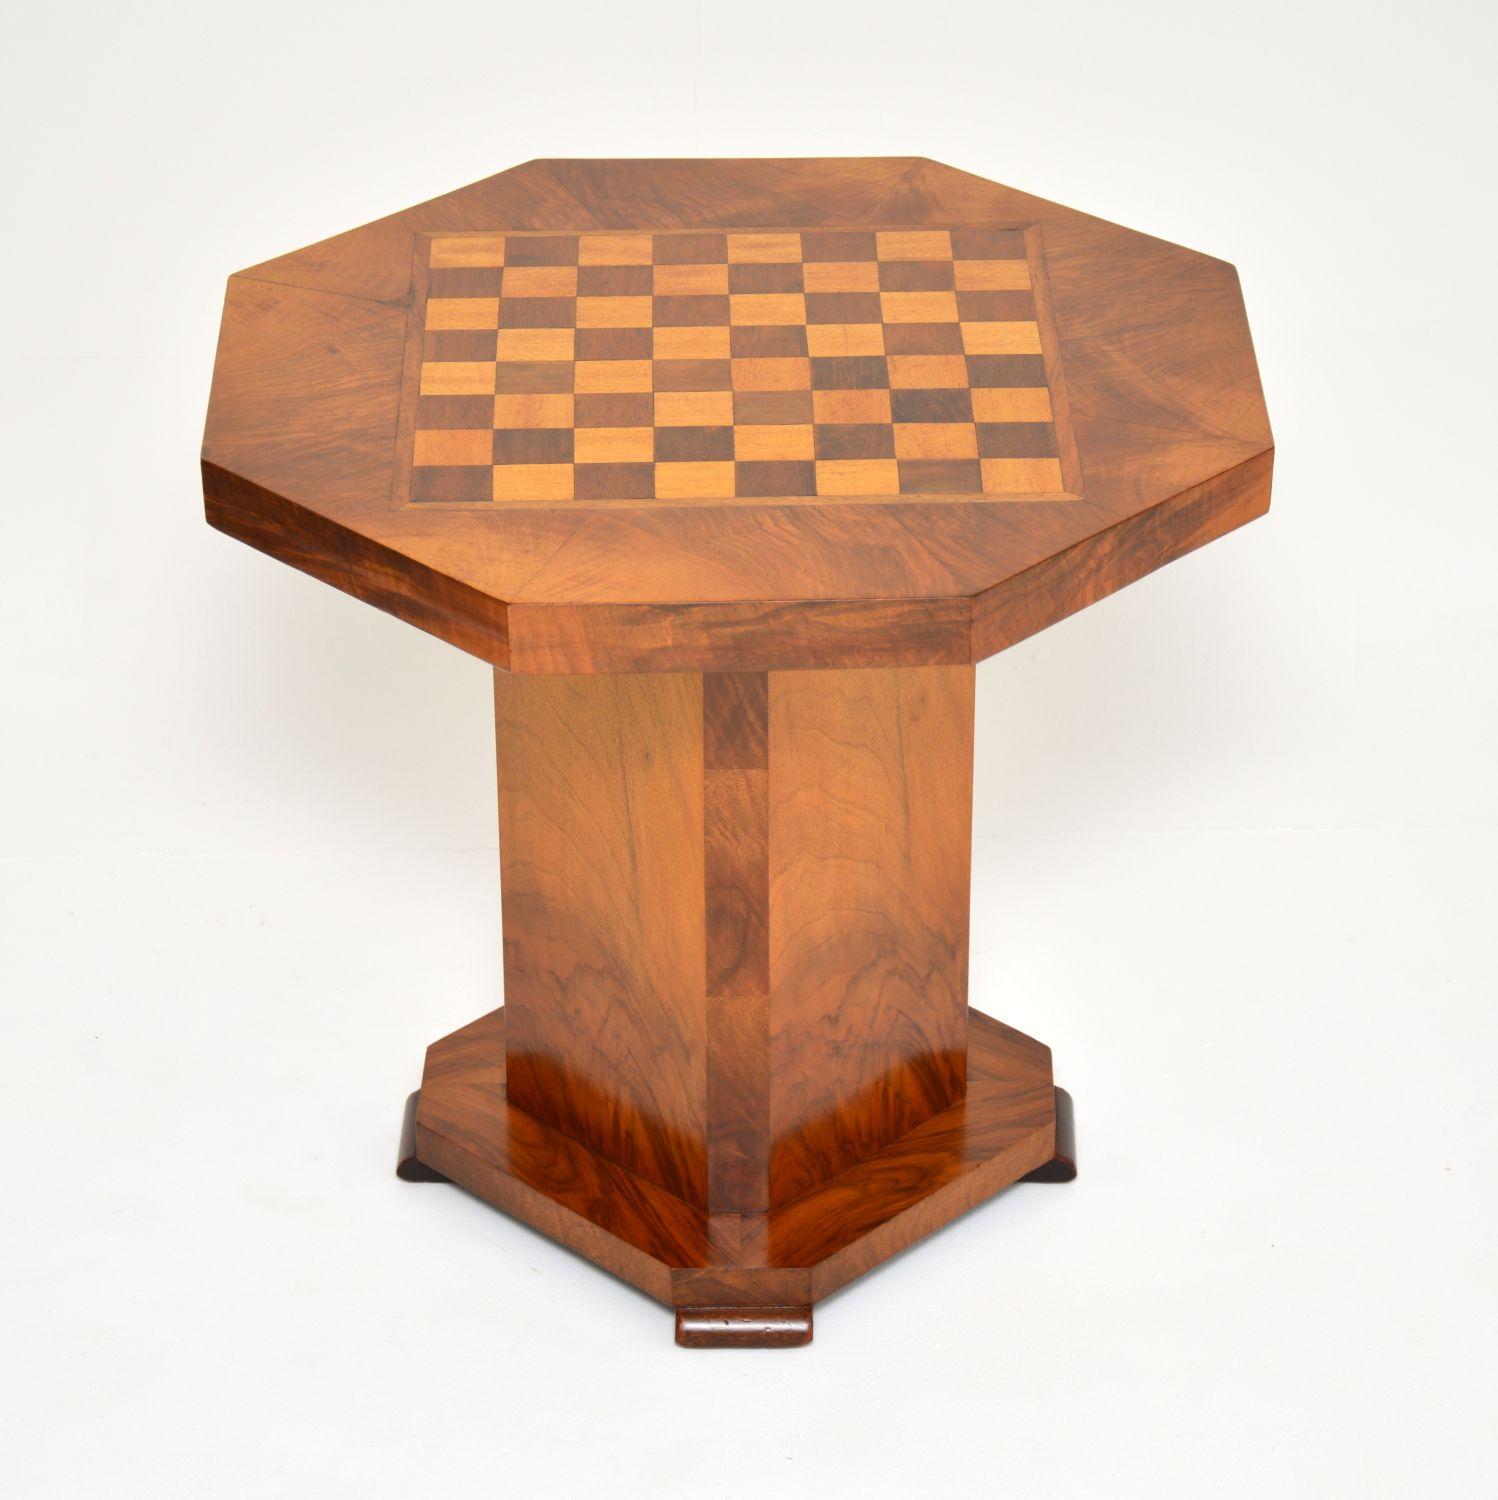 A superb original Art Deco period occasional table with an inlaid chess board top. This was made in England, it dates from the 1930’s.

The quality is amazing, this is a very useful and great looking piece. It is predominantly walnut, the chess